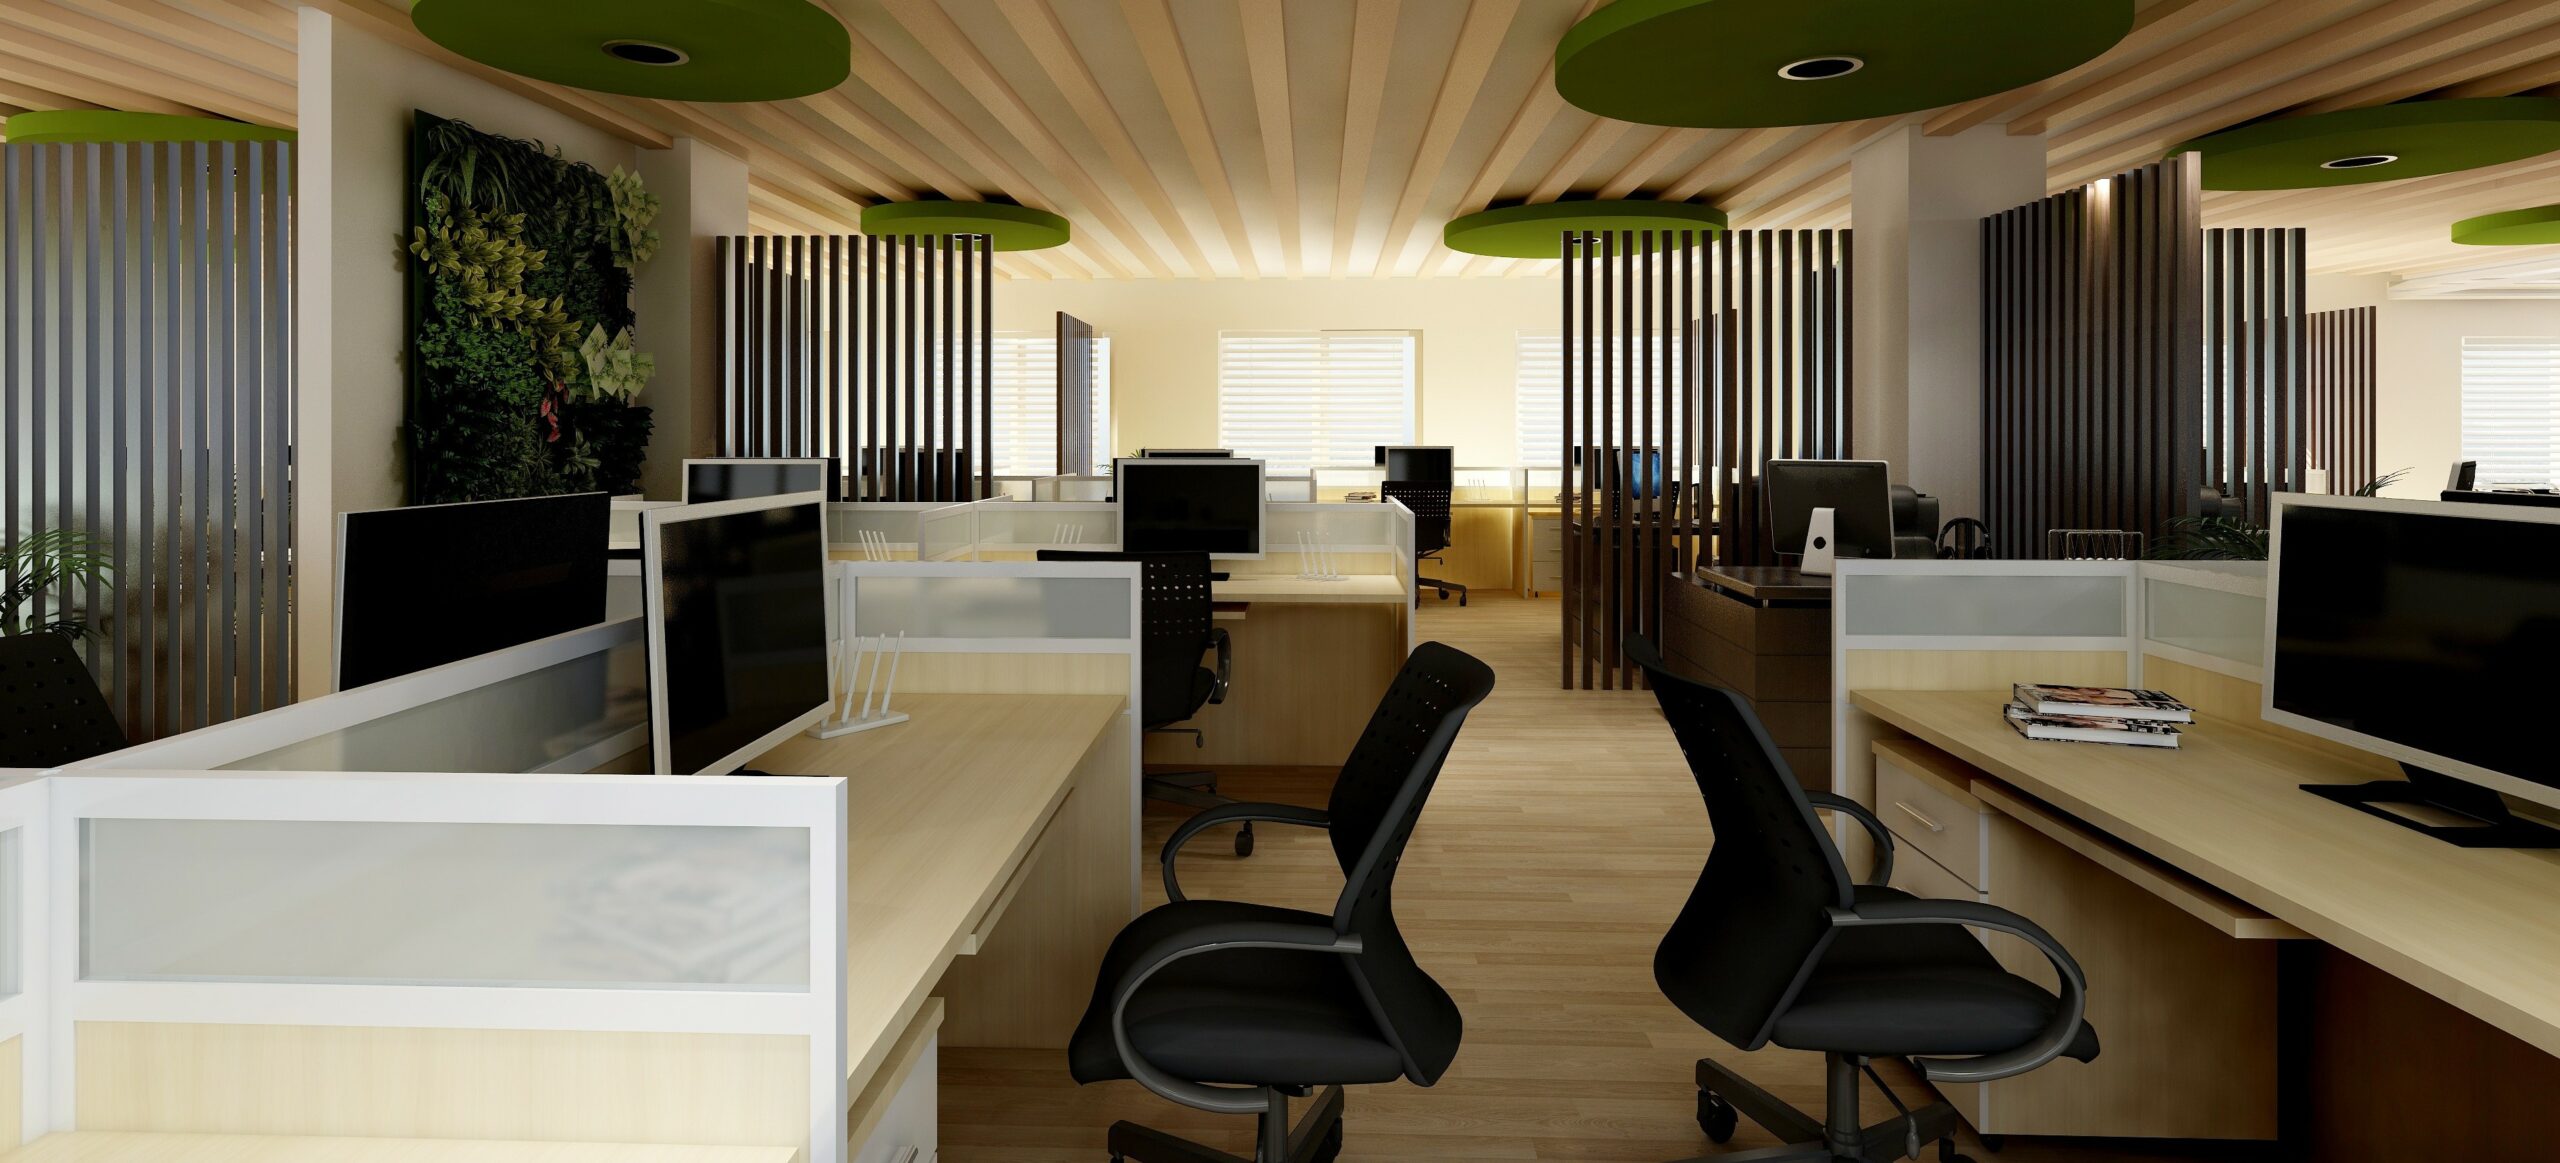 10 Best Coworking Spaces in Chennai for Startups, MSME’s and Corporates ...